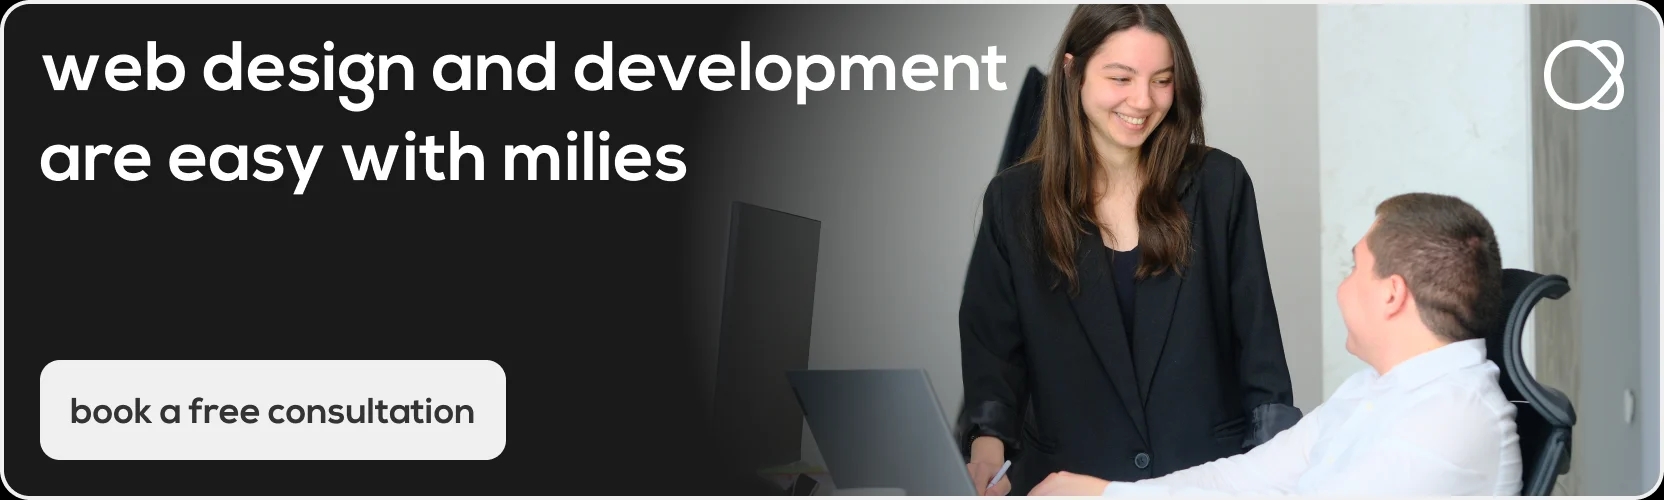 Web design and development services with Milies